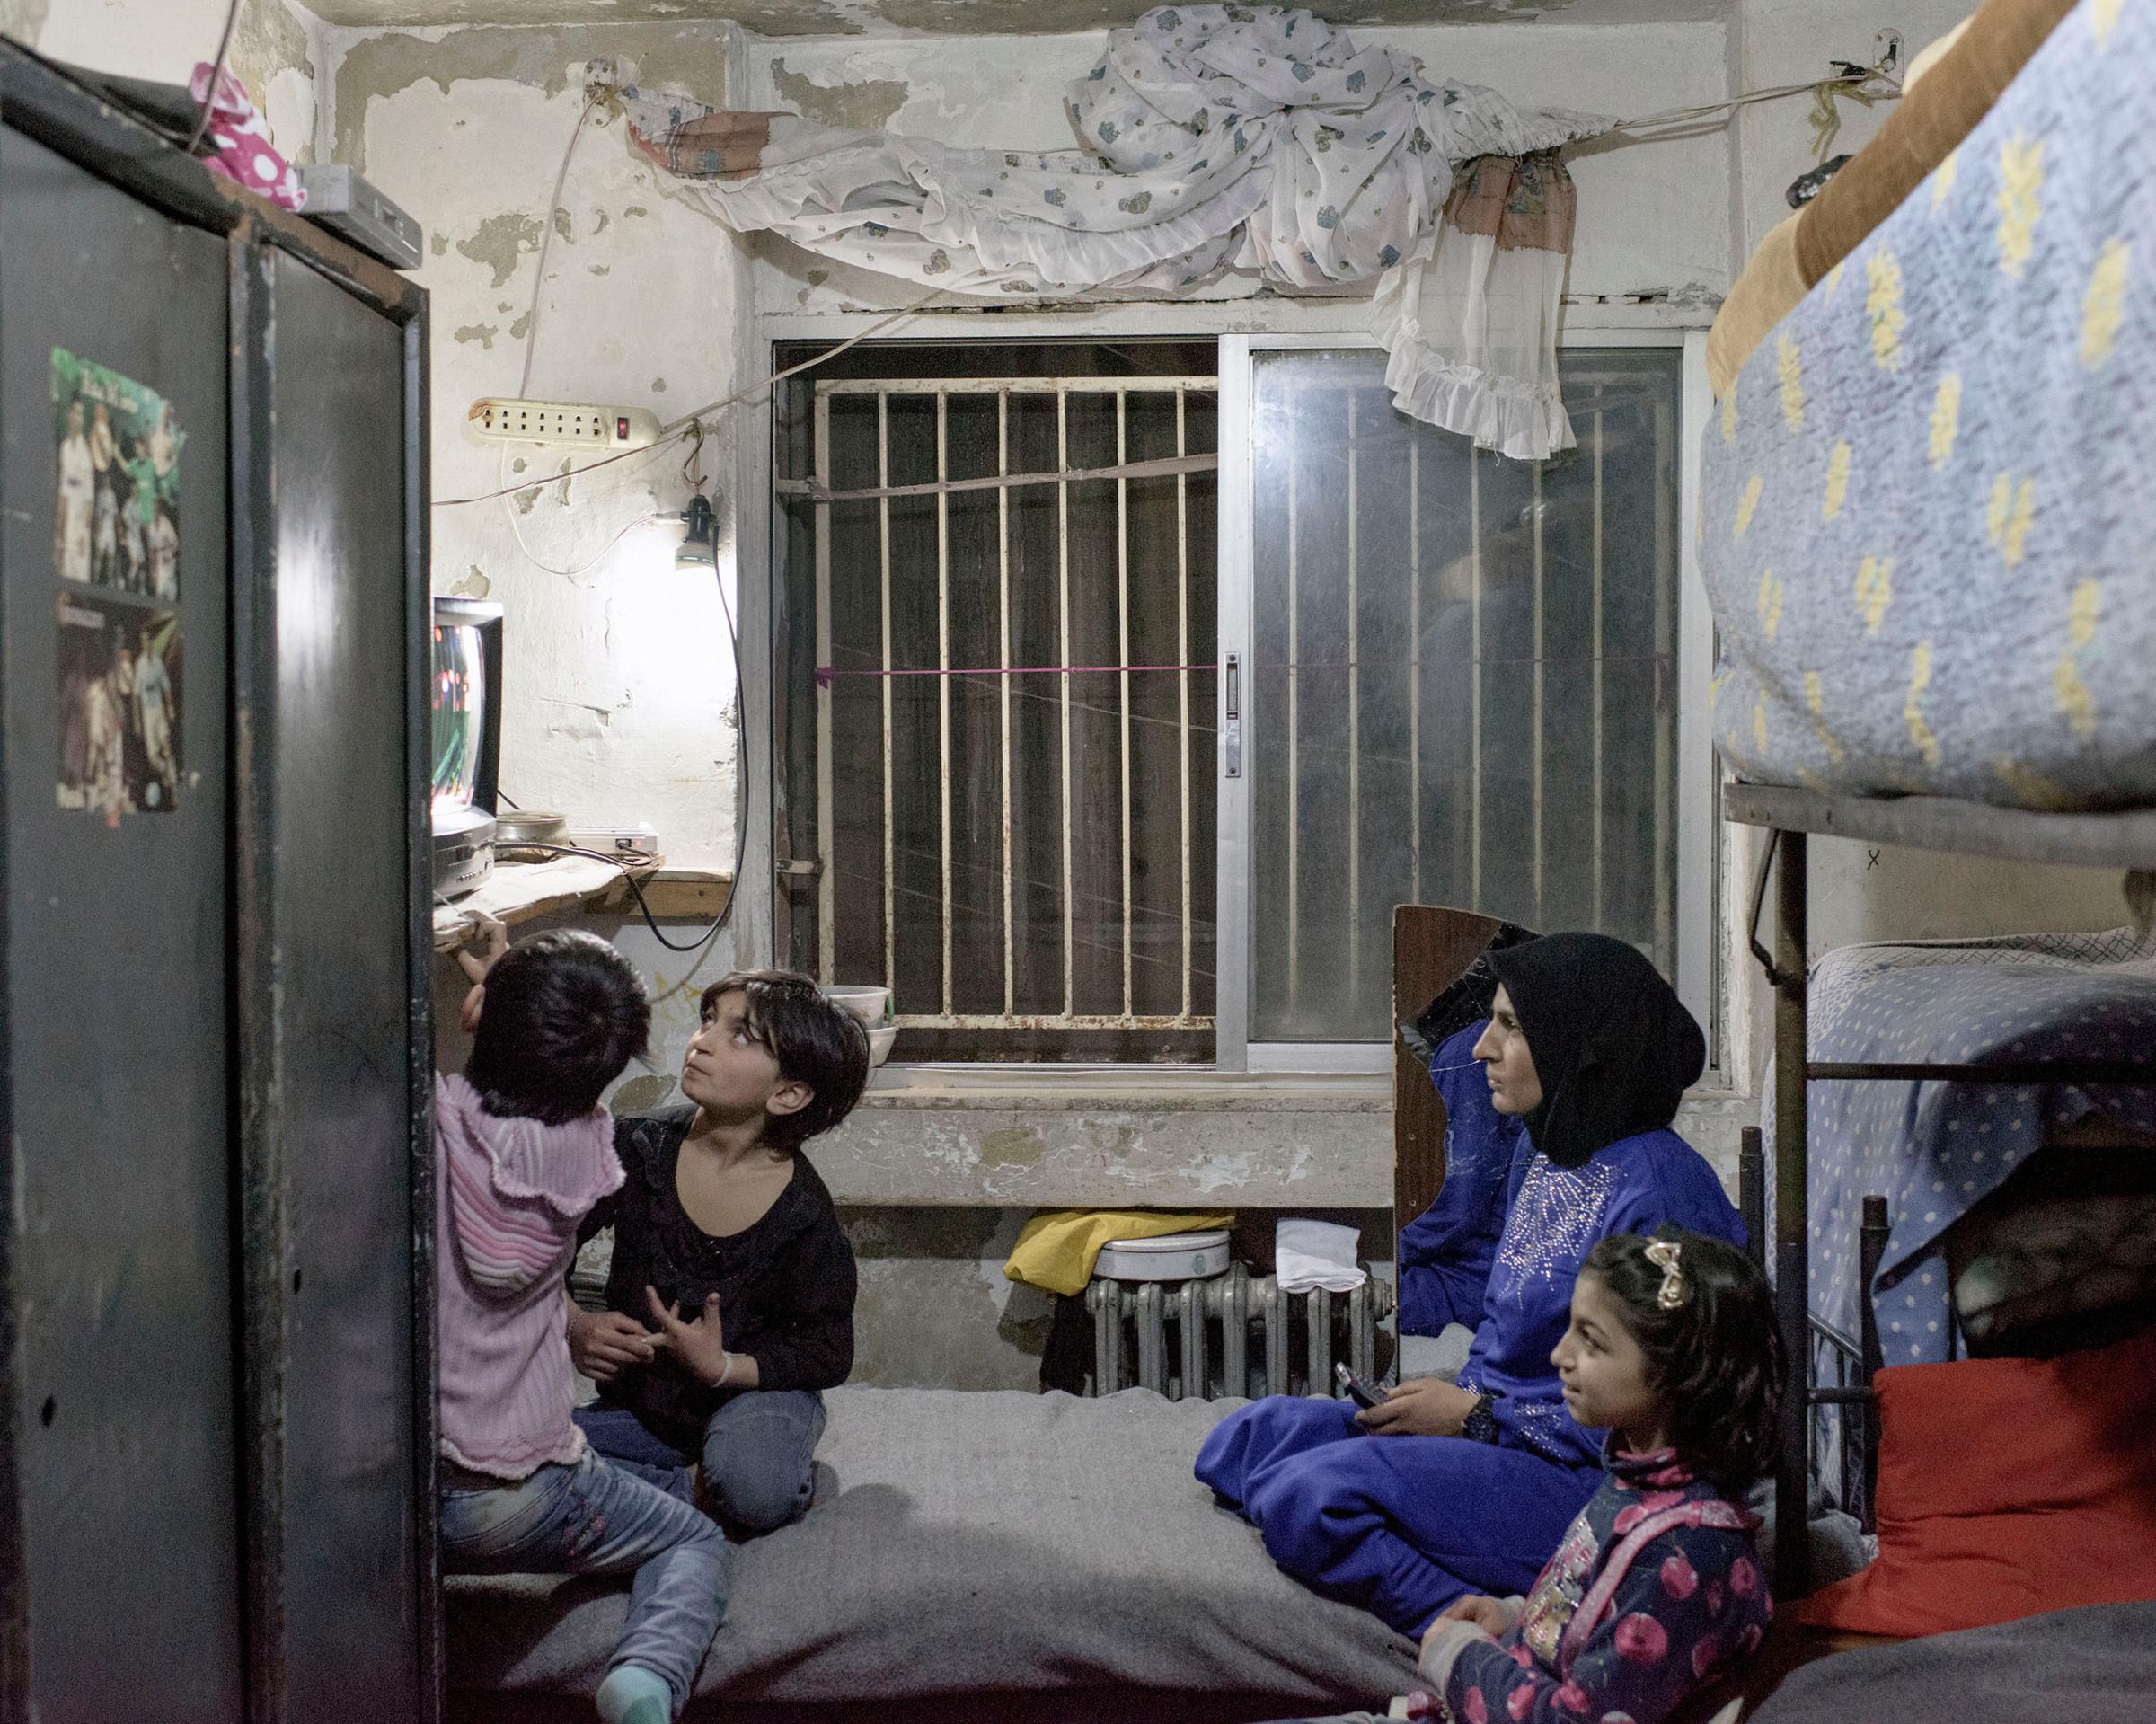 A family living in one room in a former university building, converted into housing for IDPs from surrounding districts, in Aleppo, Syria, March 2016.